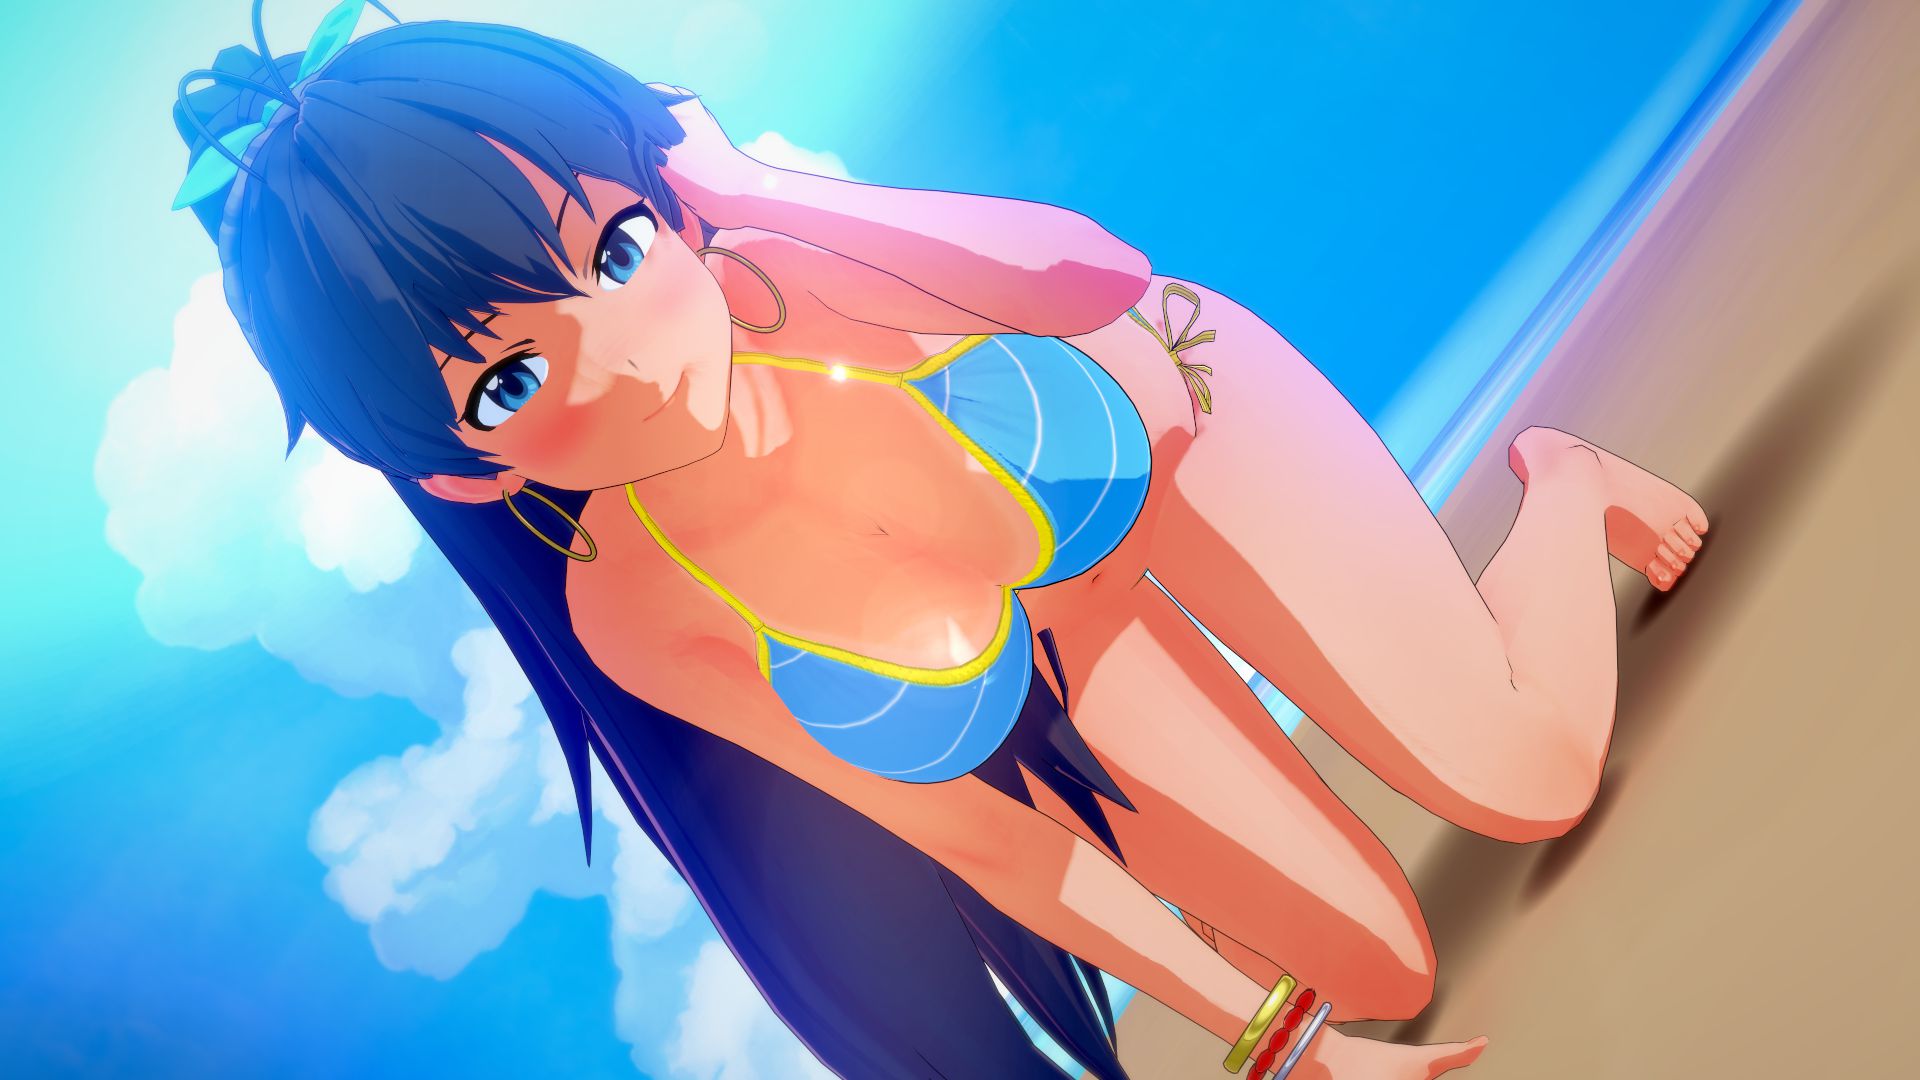 【Image】 The Idolmaster 765 Pro reproduced in eroge is talked about as too etch 1